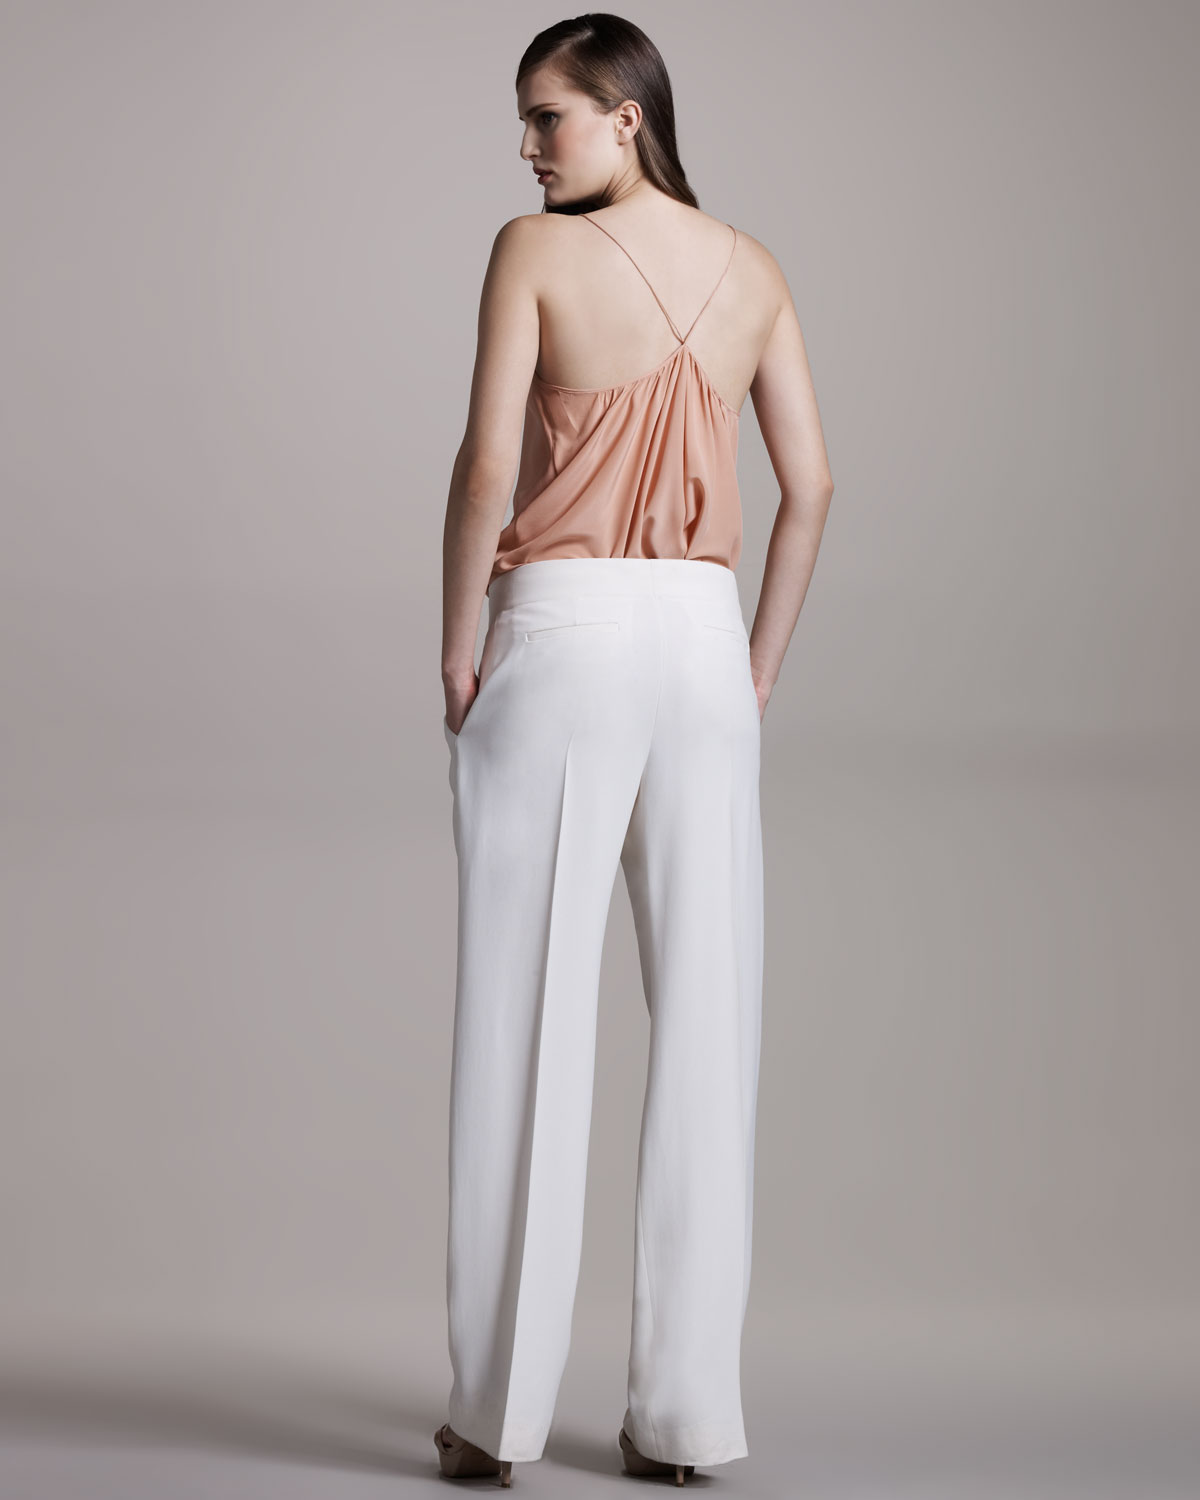 Lyst - Chloé Pleated Wide Leg Pants in White